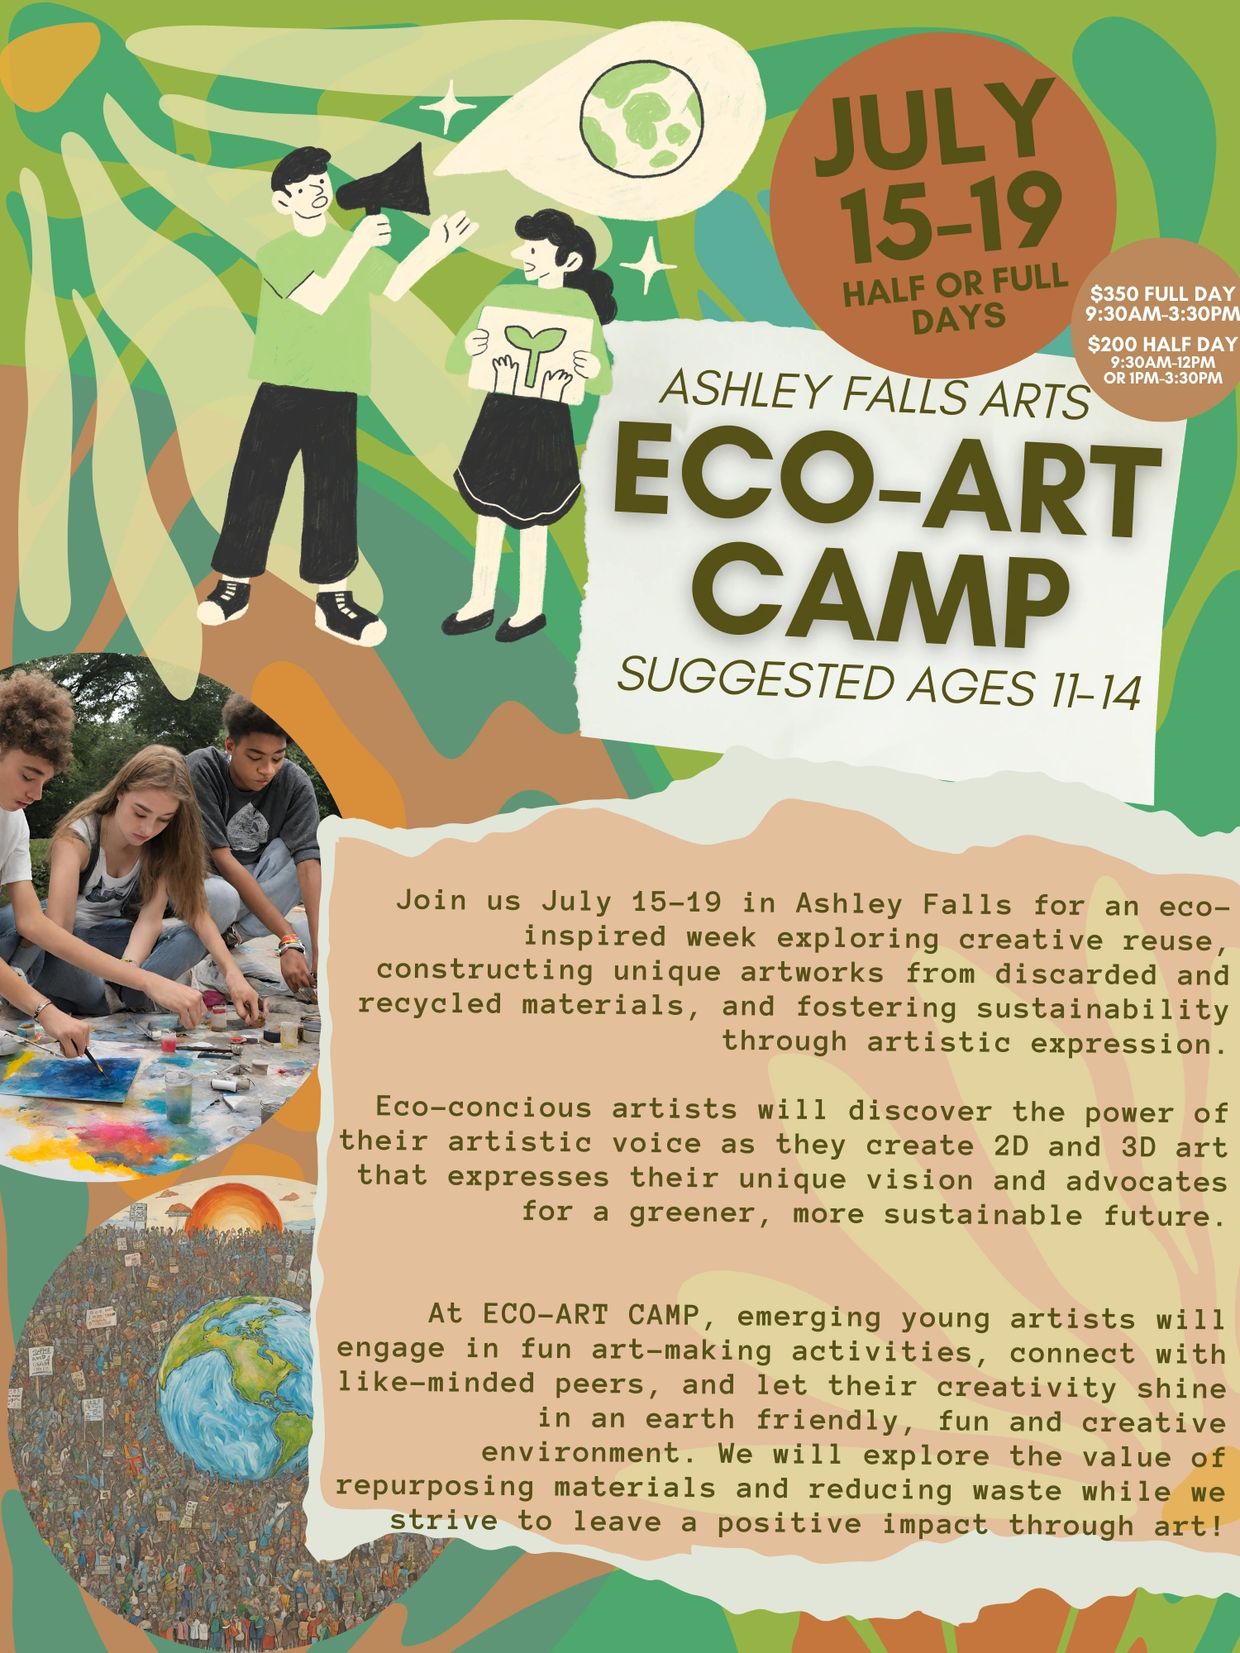 Join us July 15-19 in Ashley Falls for an eco-inspired week exploring creative reuse, constructing u